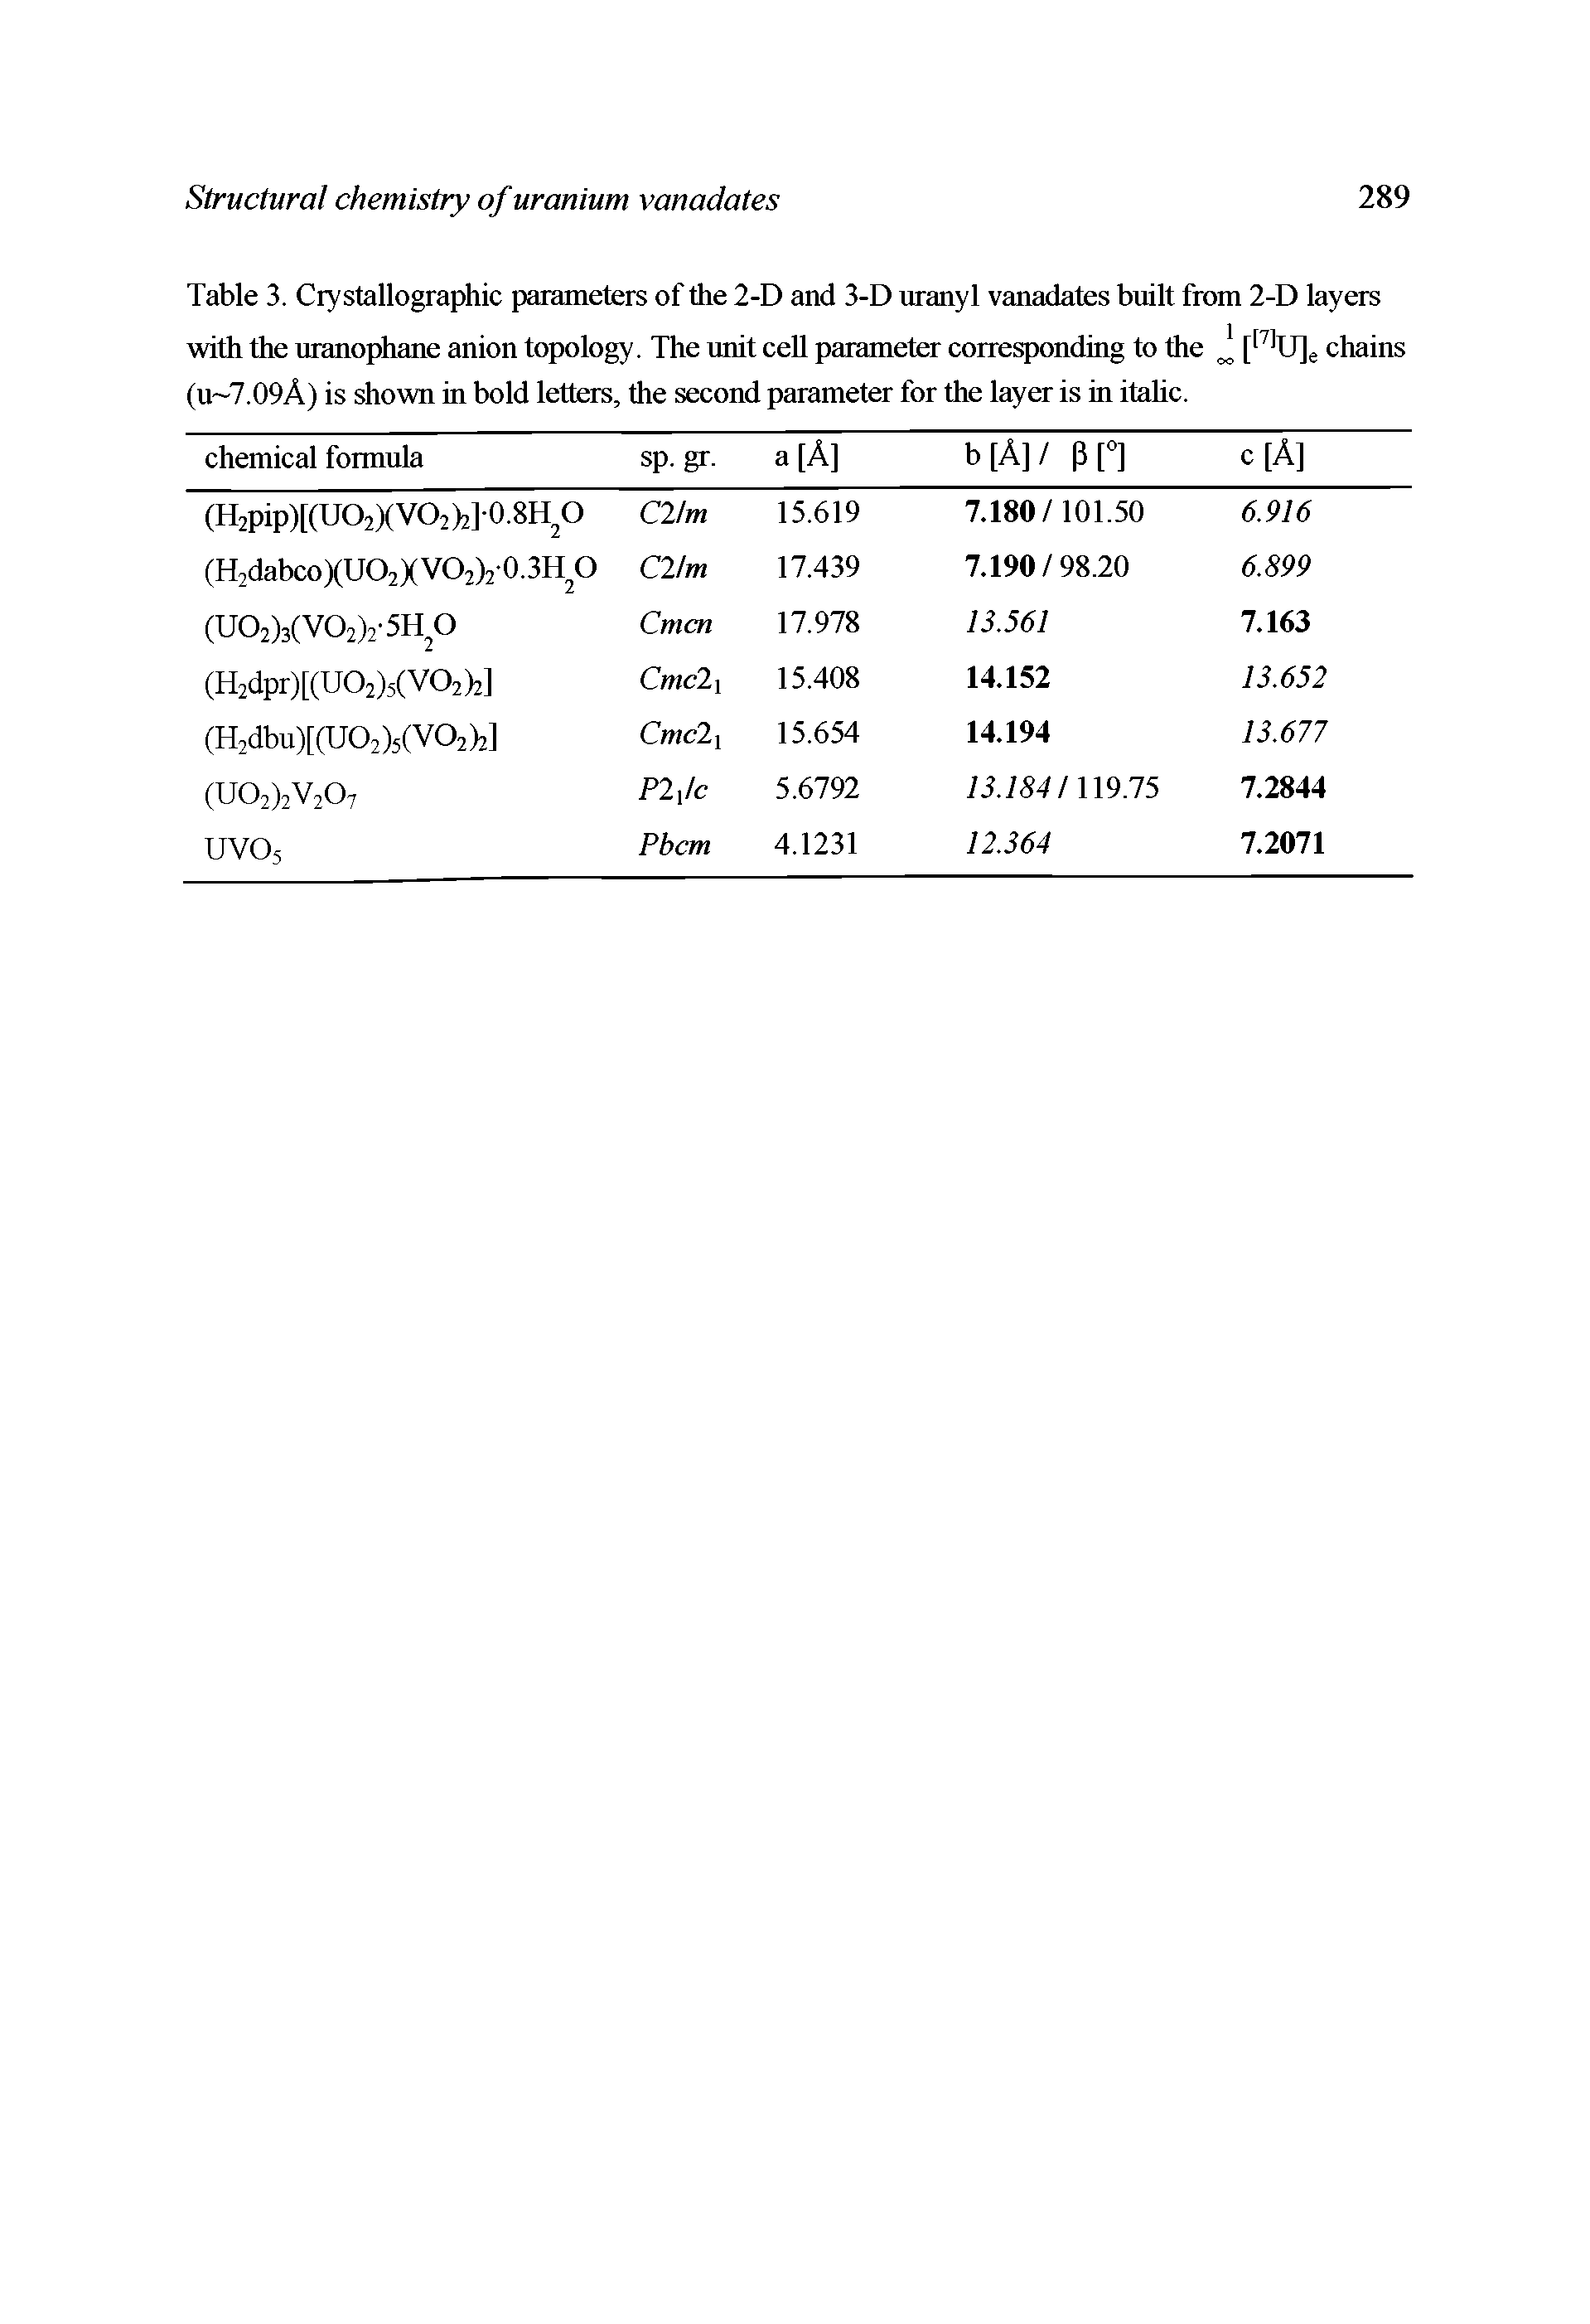 Table 3. Crystallographic parameters of the 2-D and 3-D uranyl vanadates built from 2-D layers with the uranophane anion topology. The unit ceU parameter corresponding to the J [ U]e chains (U-7.09A) is shown in bold letters, the second parameter for the layer is in itahc.